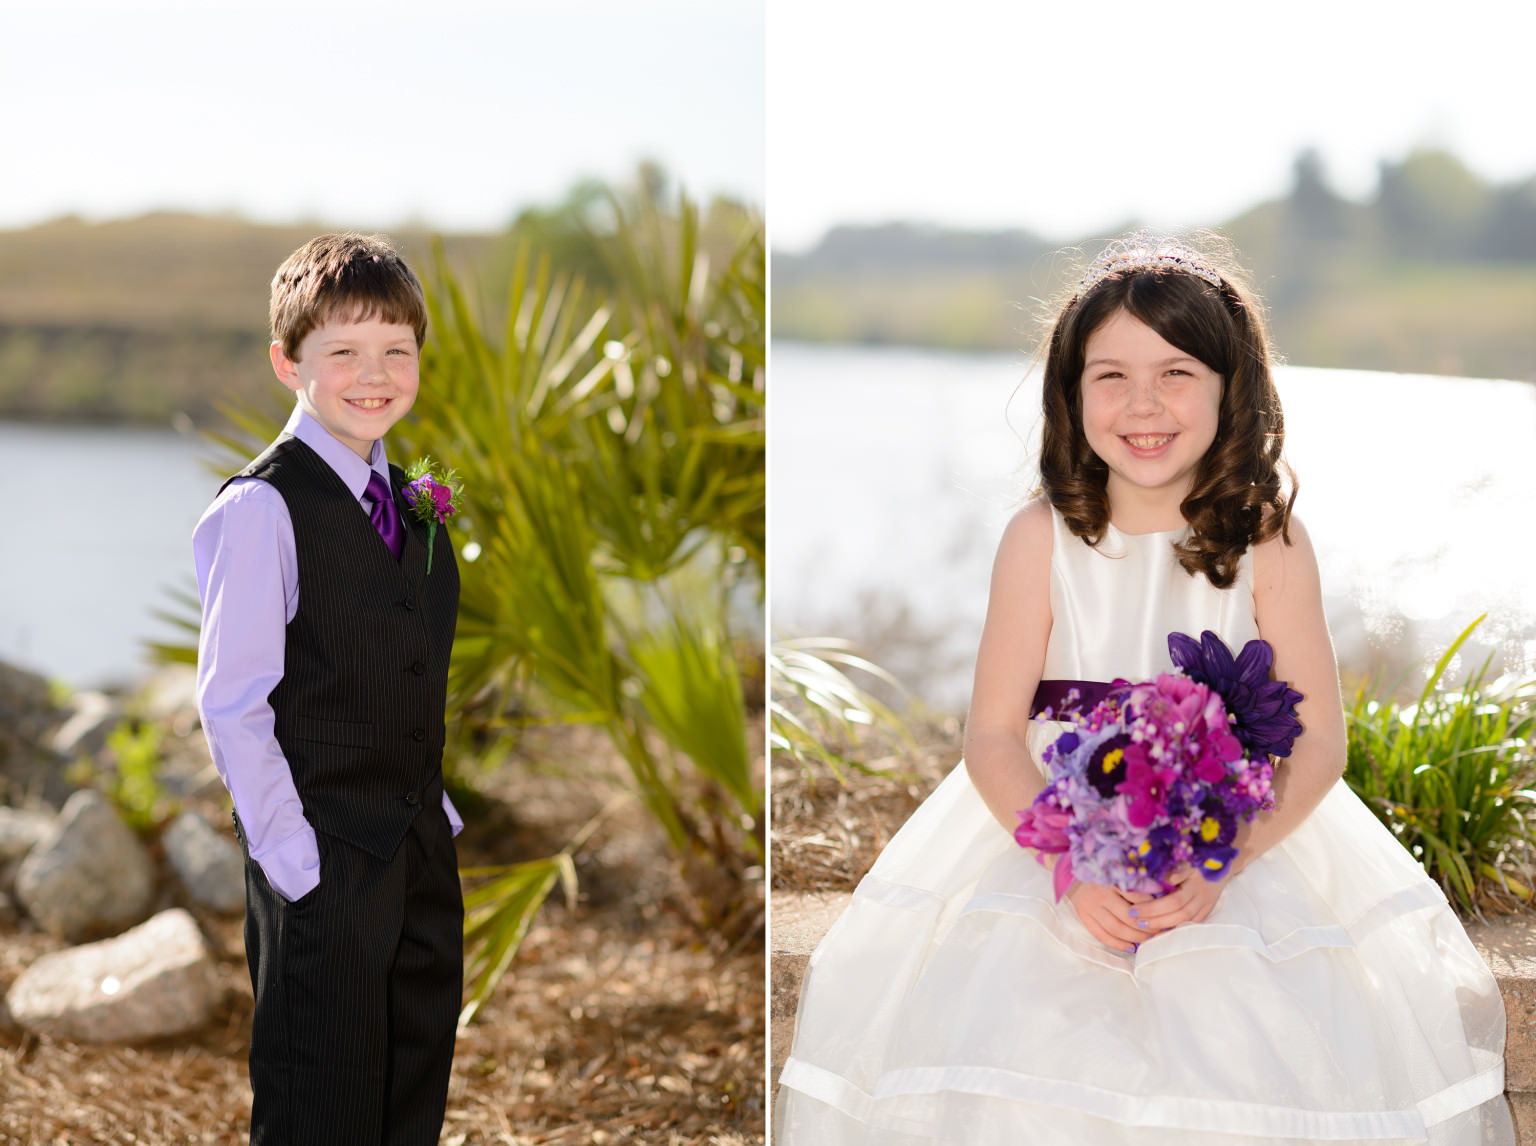 Cute shots of the bride's children after the wedding